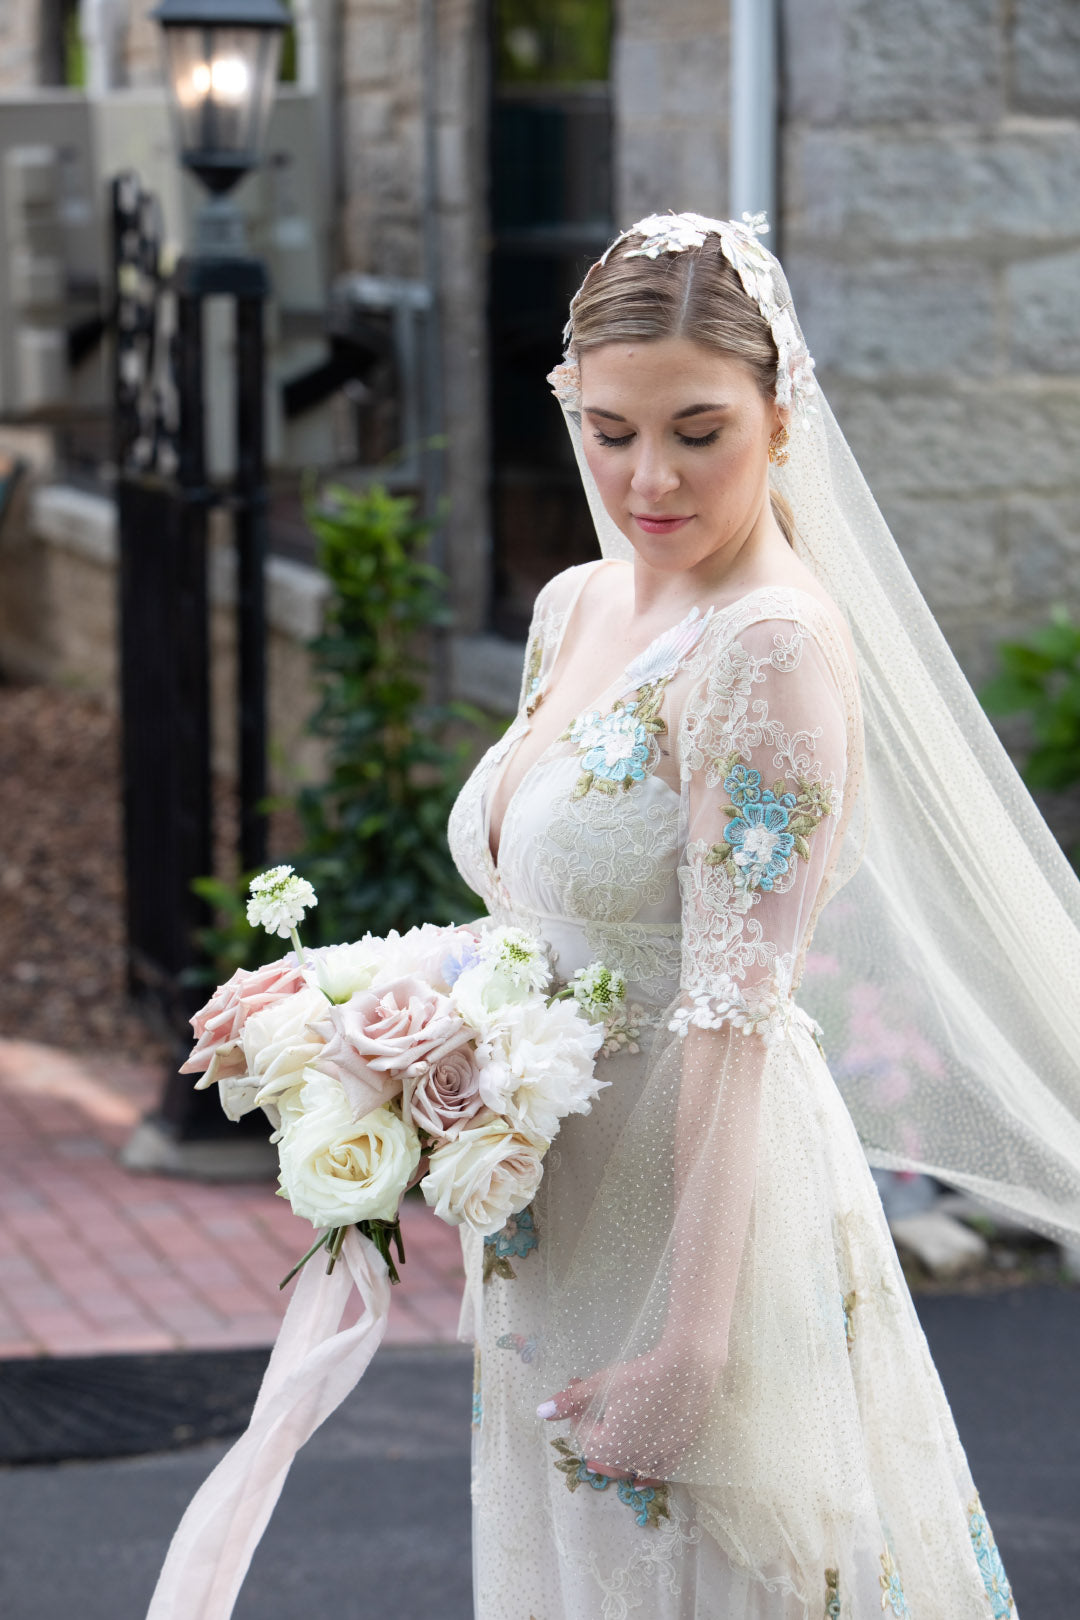 Bride holding wedding flower bouquet wearing Chrysalis wedding dress with bell sleeves